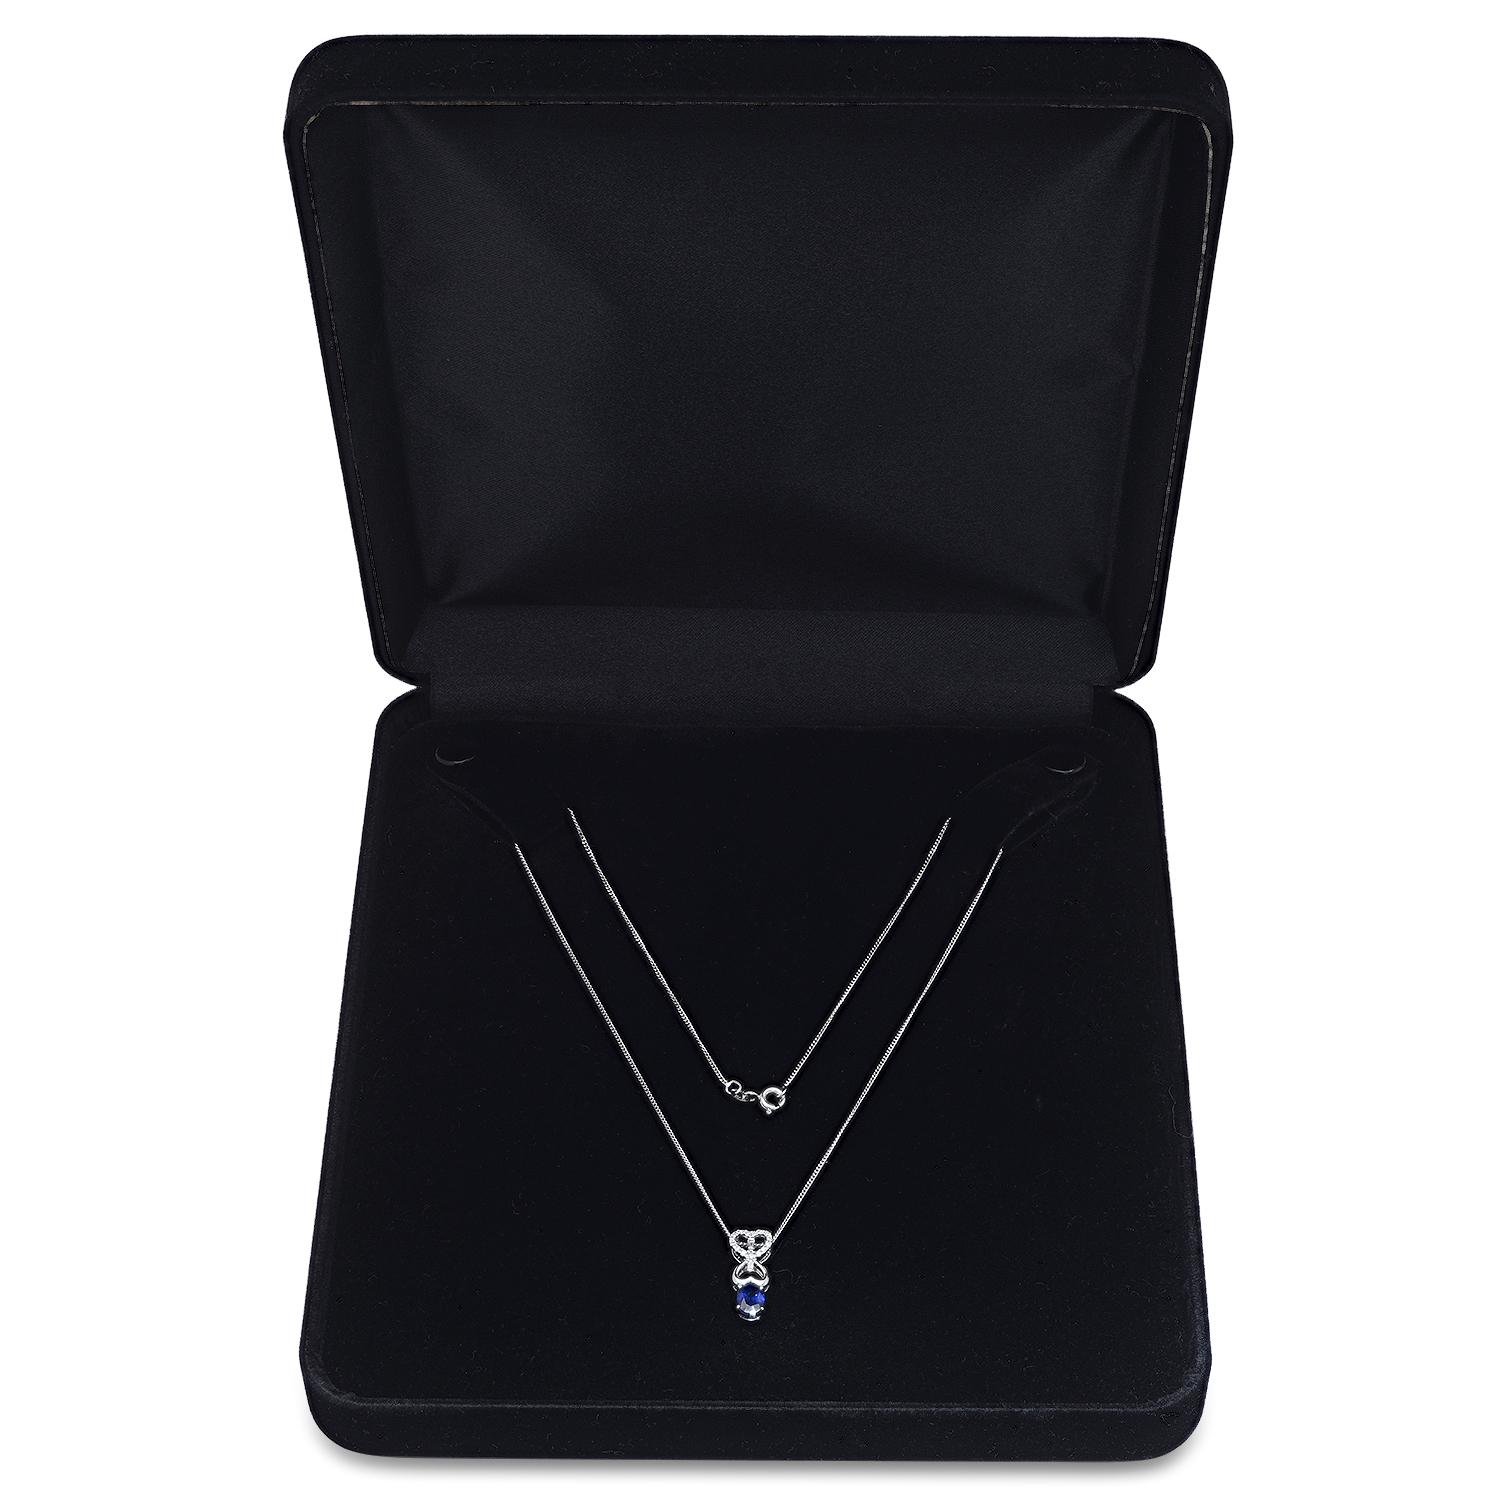 18K White Gold Setting with 0.91ct Sapphire and 0.10ct Diamond Pendant